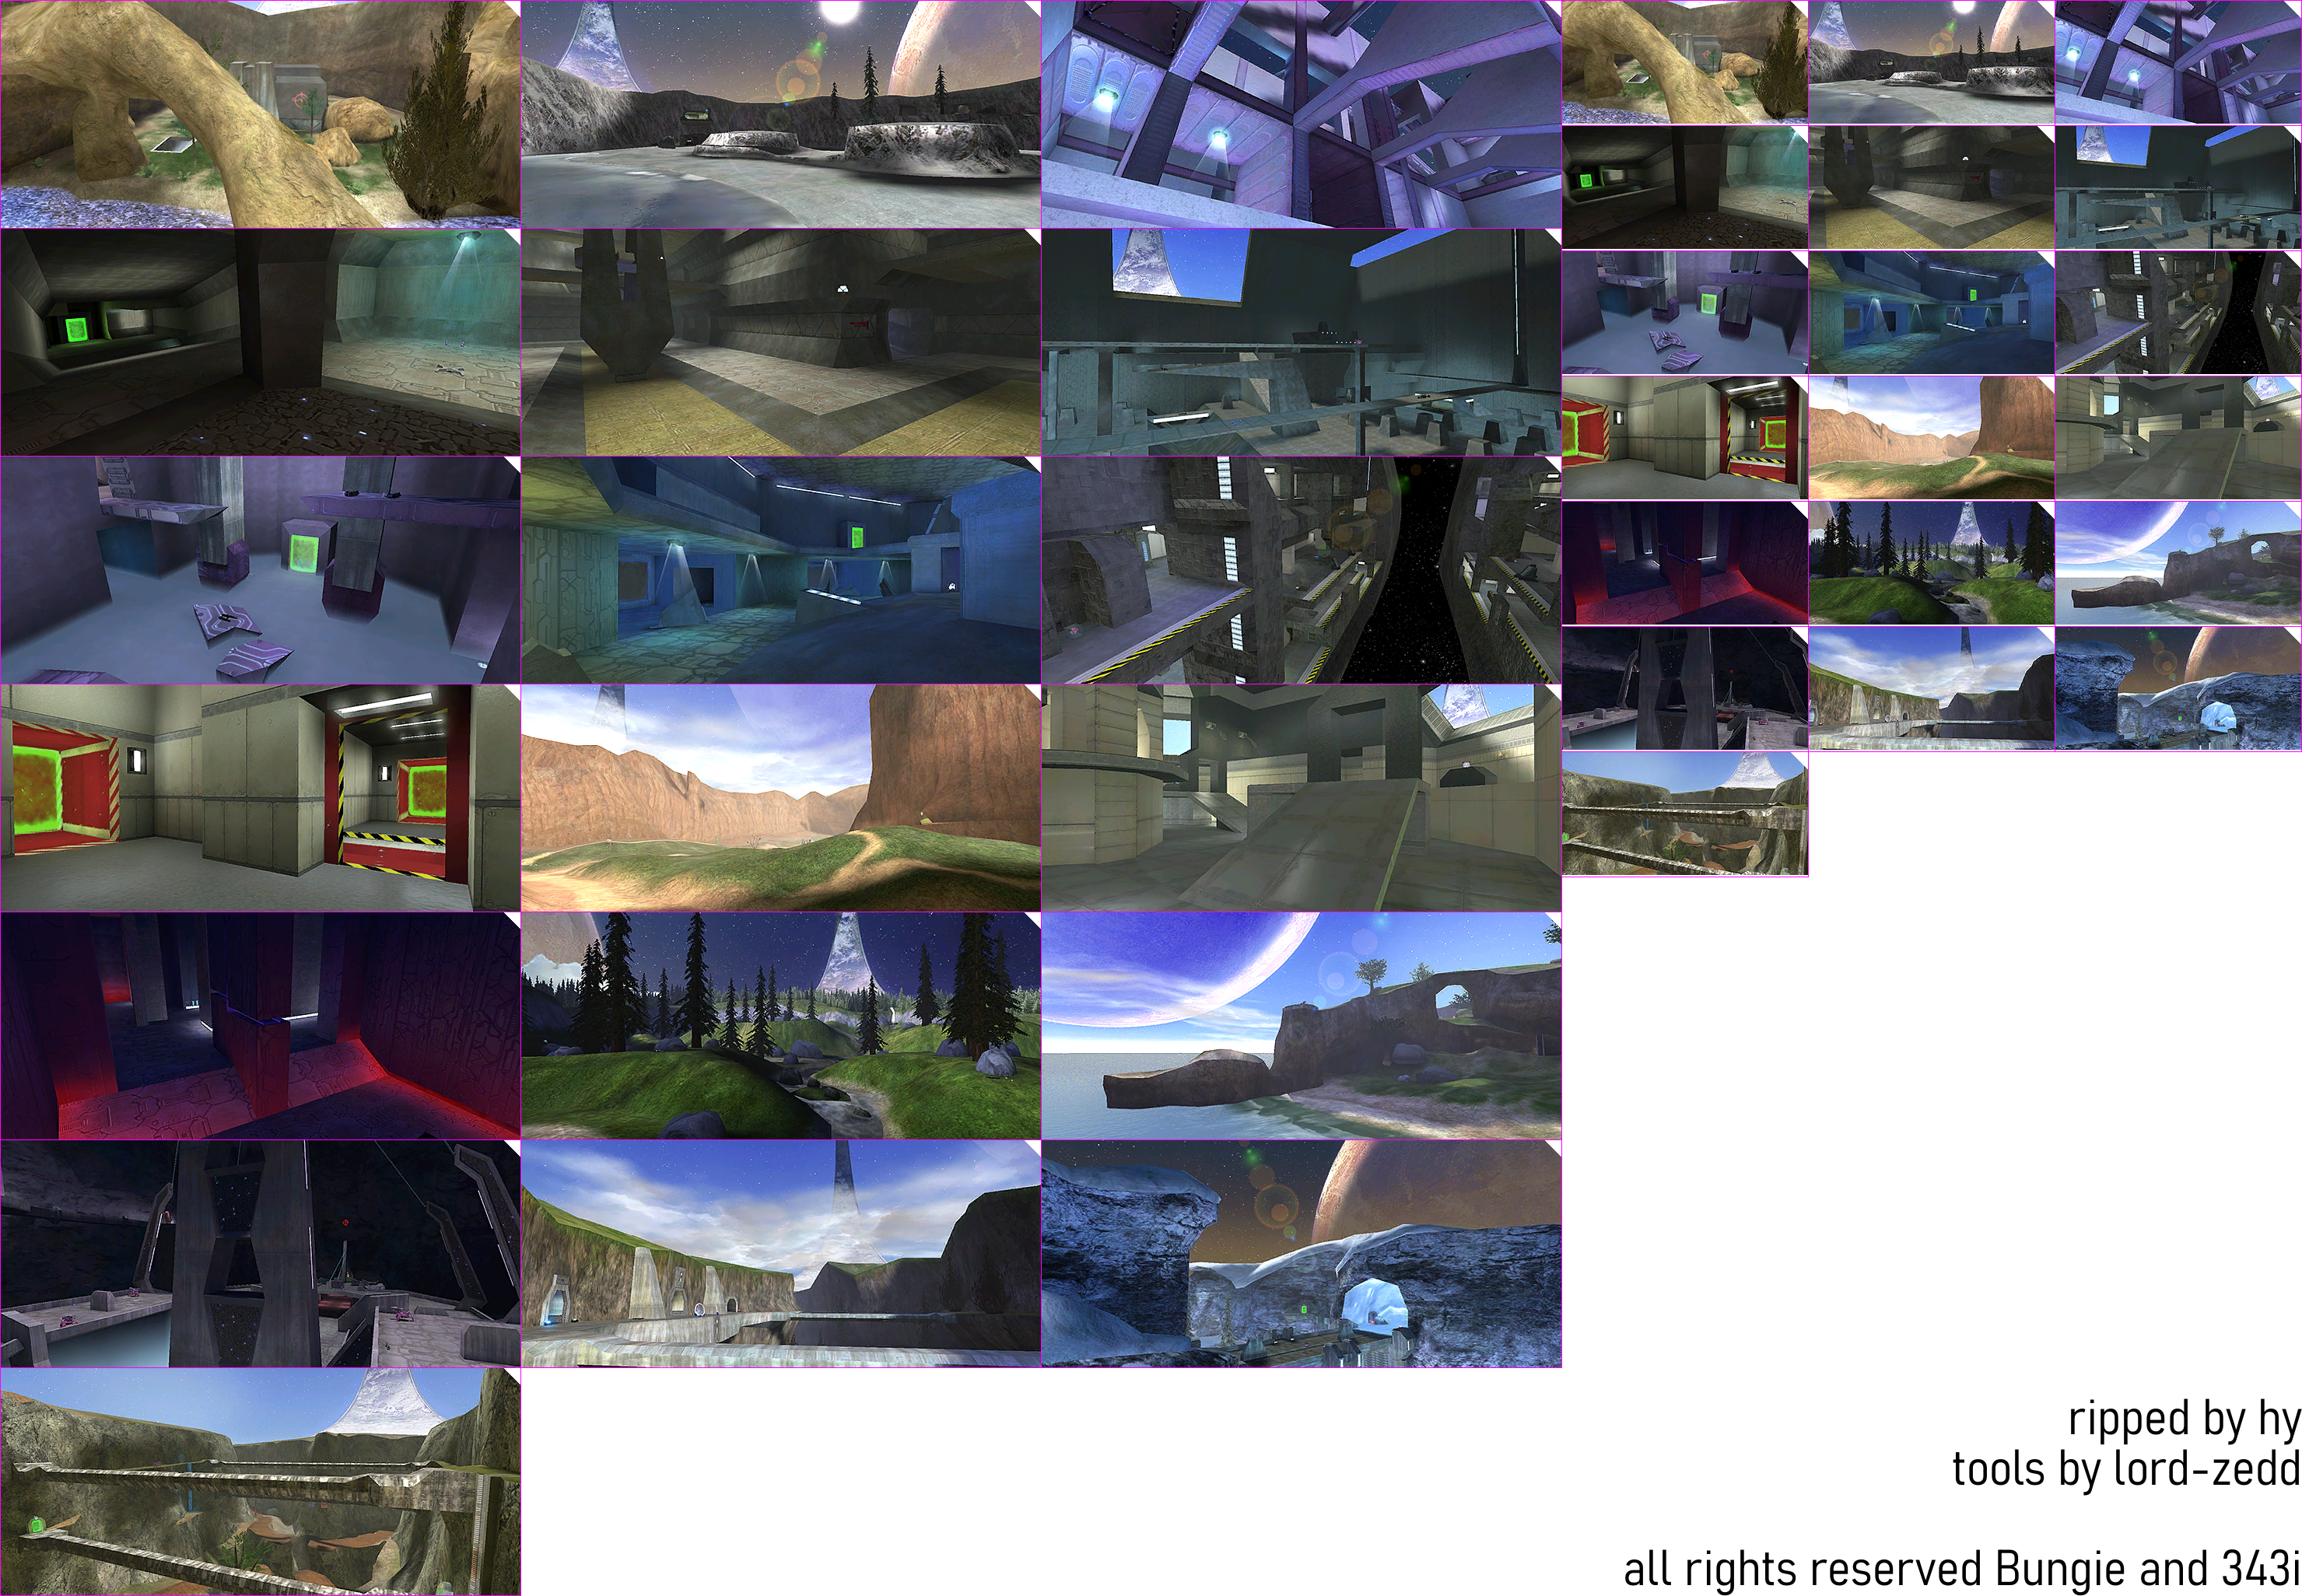 Halo: The Master Chief Collection - Halo CE Multiplayer Level Previews